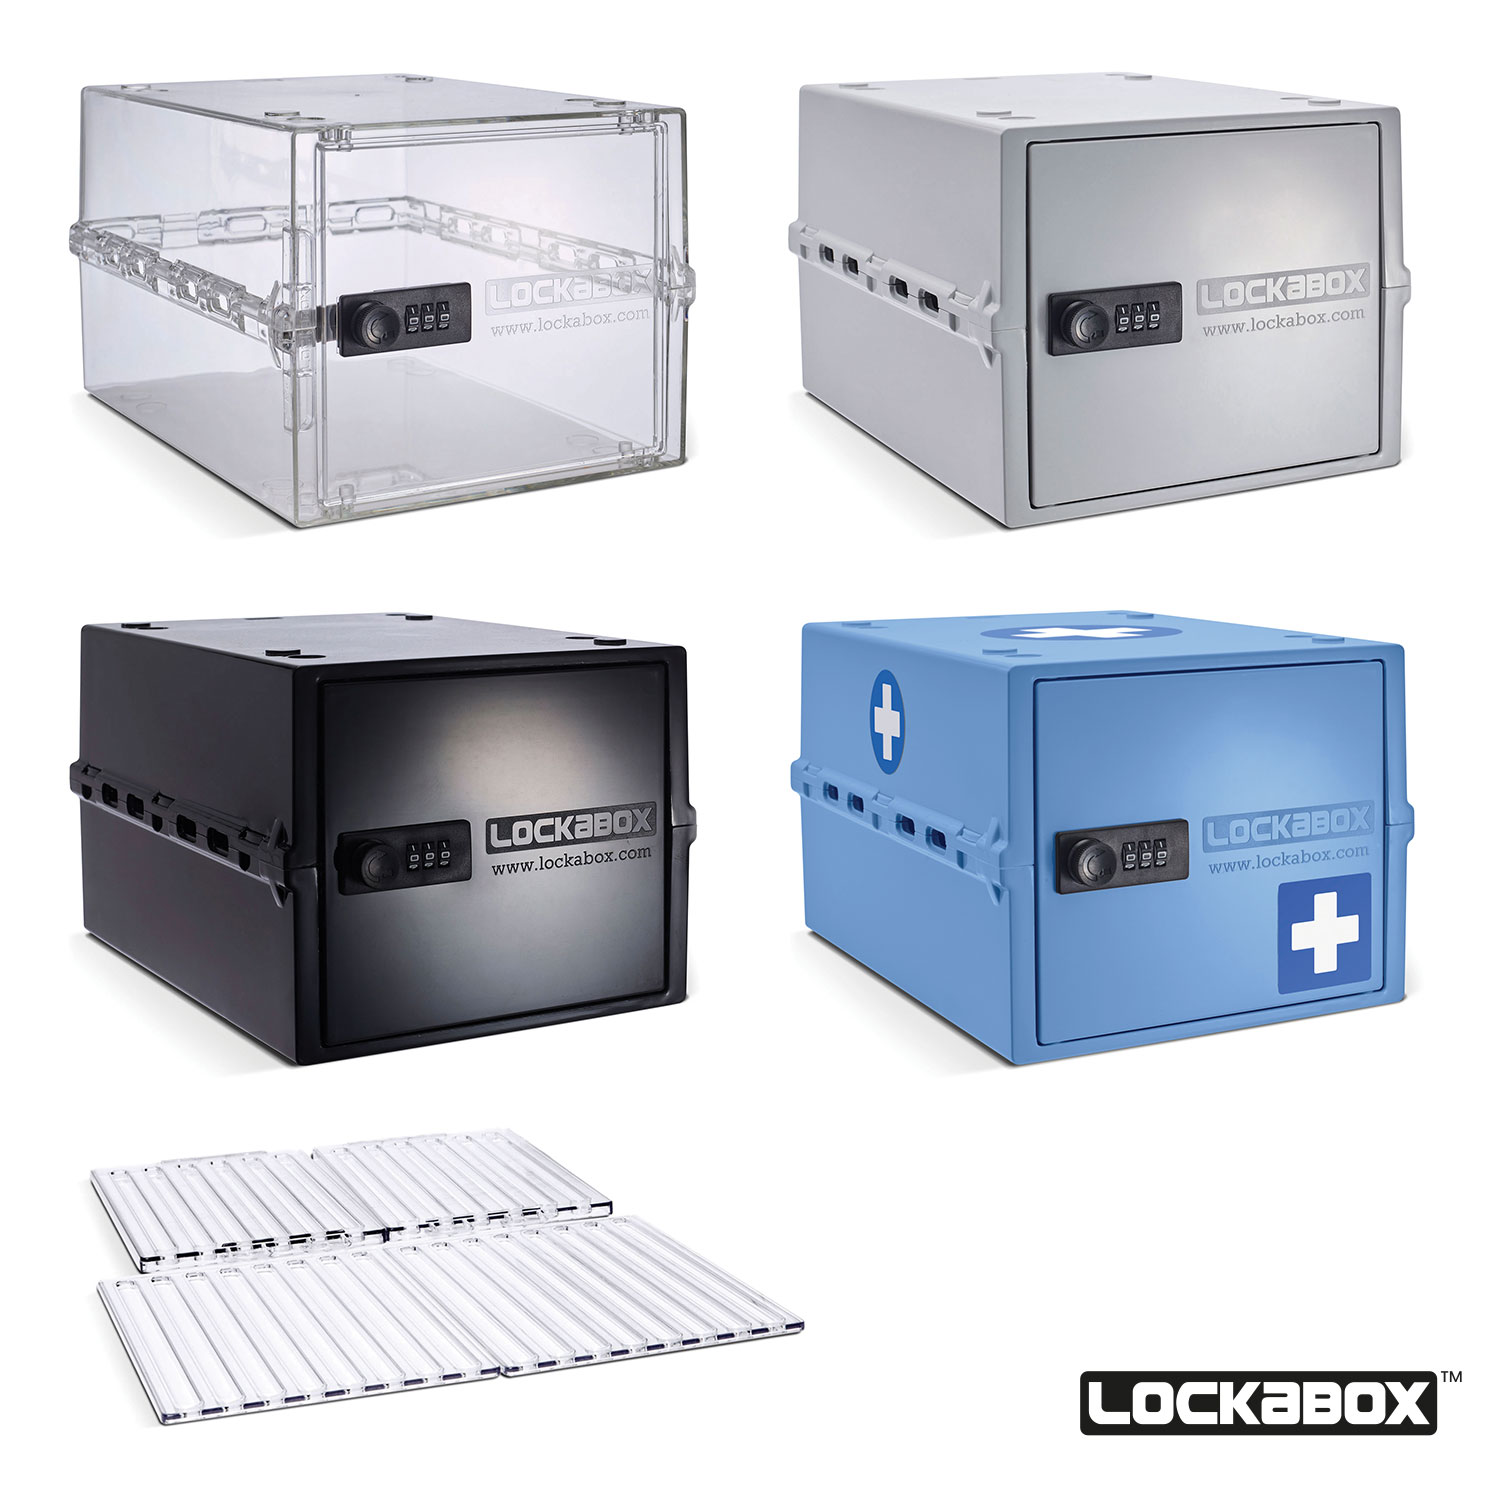 Lockabox-Product-Collection-1500×1500